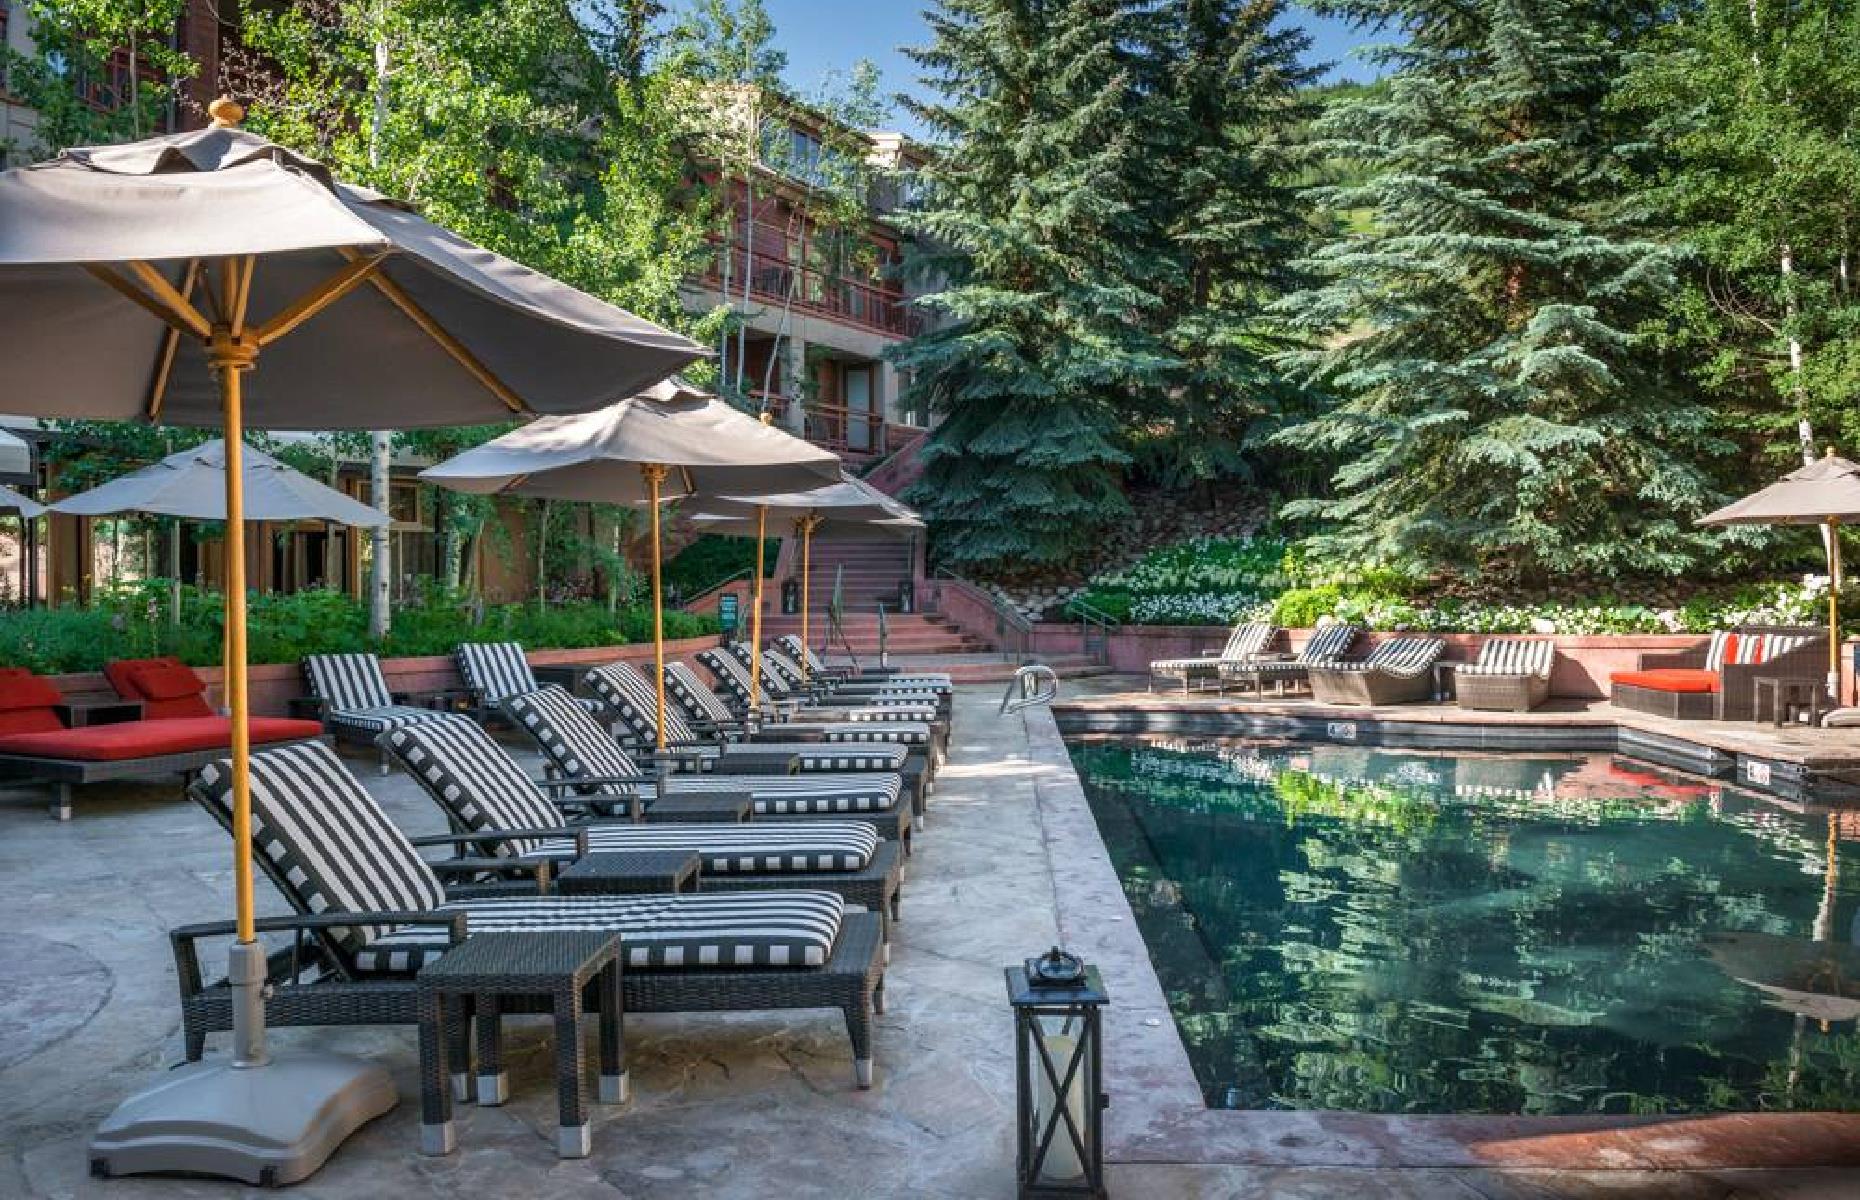 <p>Aspen is rich with out-of-this-world resorts and another first-rate option is <a href="https://www.thelittlenell.com/">The Little Nell</a>. Offering the maximum level of comfort and opulence, it’s front and center for both skiing and basking in Aspen’s bustling social scene. It’s the place to be for a top-drawer après-ski experience, with a hot spot restaurant, a tavern and a chic wine bar. Guests are also given the chance to make “first tracks” on Aspen Mountain before the slopes open to the public for the day.</p>  <p><strong><a href="https://www.loveexploring.com/galleries/90765/the-most-glamorous-hotel-in-every-state">Discover the most glamorous hotel in every state</a></strong></p>